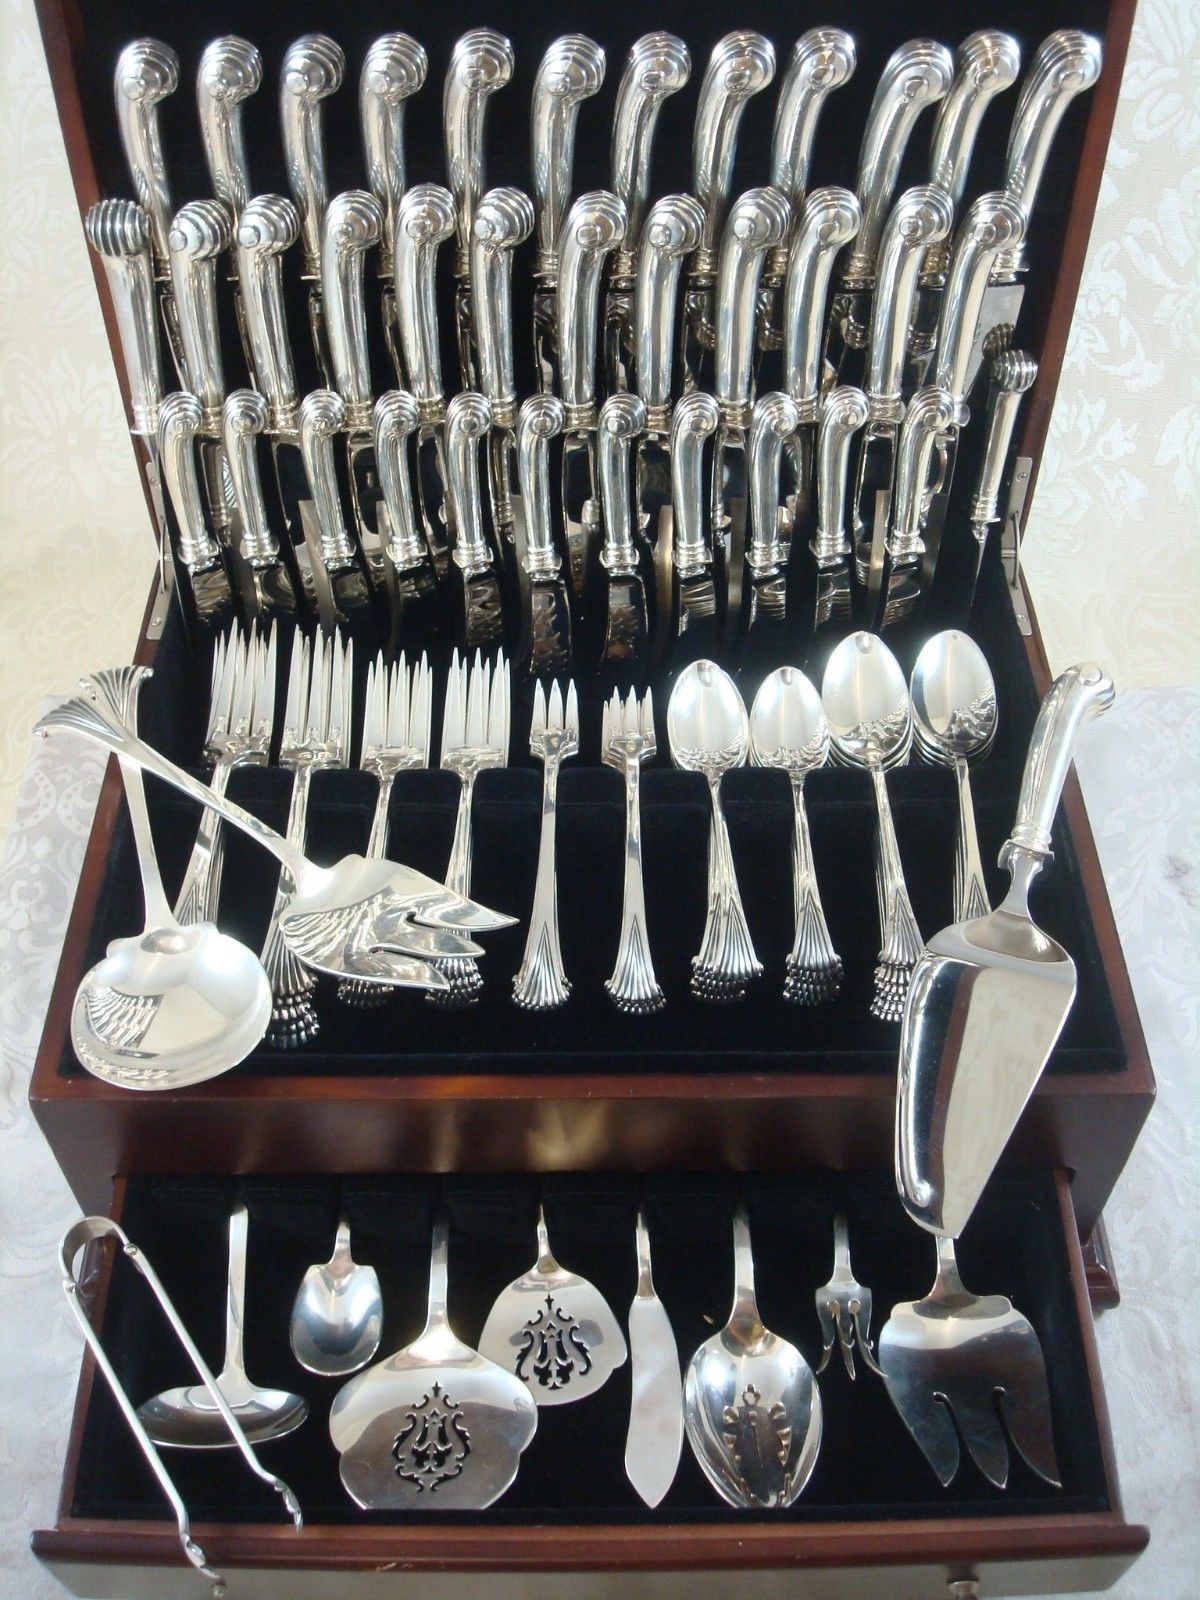 Exquisite Onslow by Tuttle sterling silver massive flatware set, 110 pieces. This pattern is heavy with wonderful pistol-grip handles on the knives. This set includes:

12 knives, 8 3/4